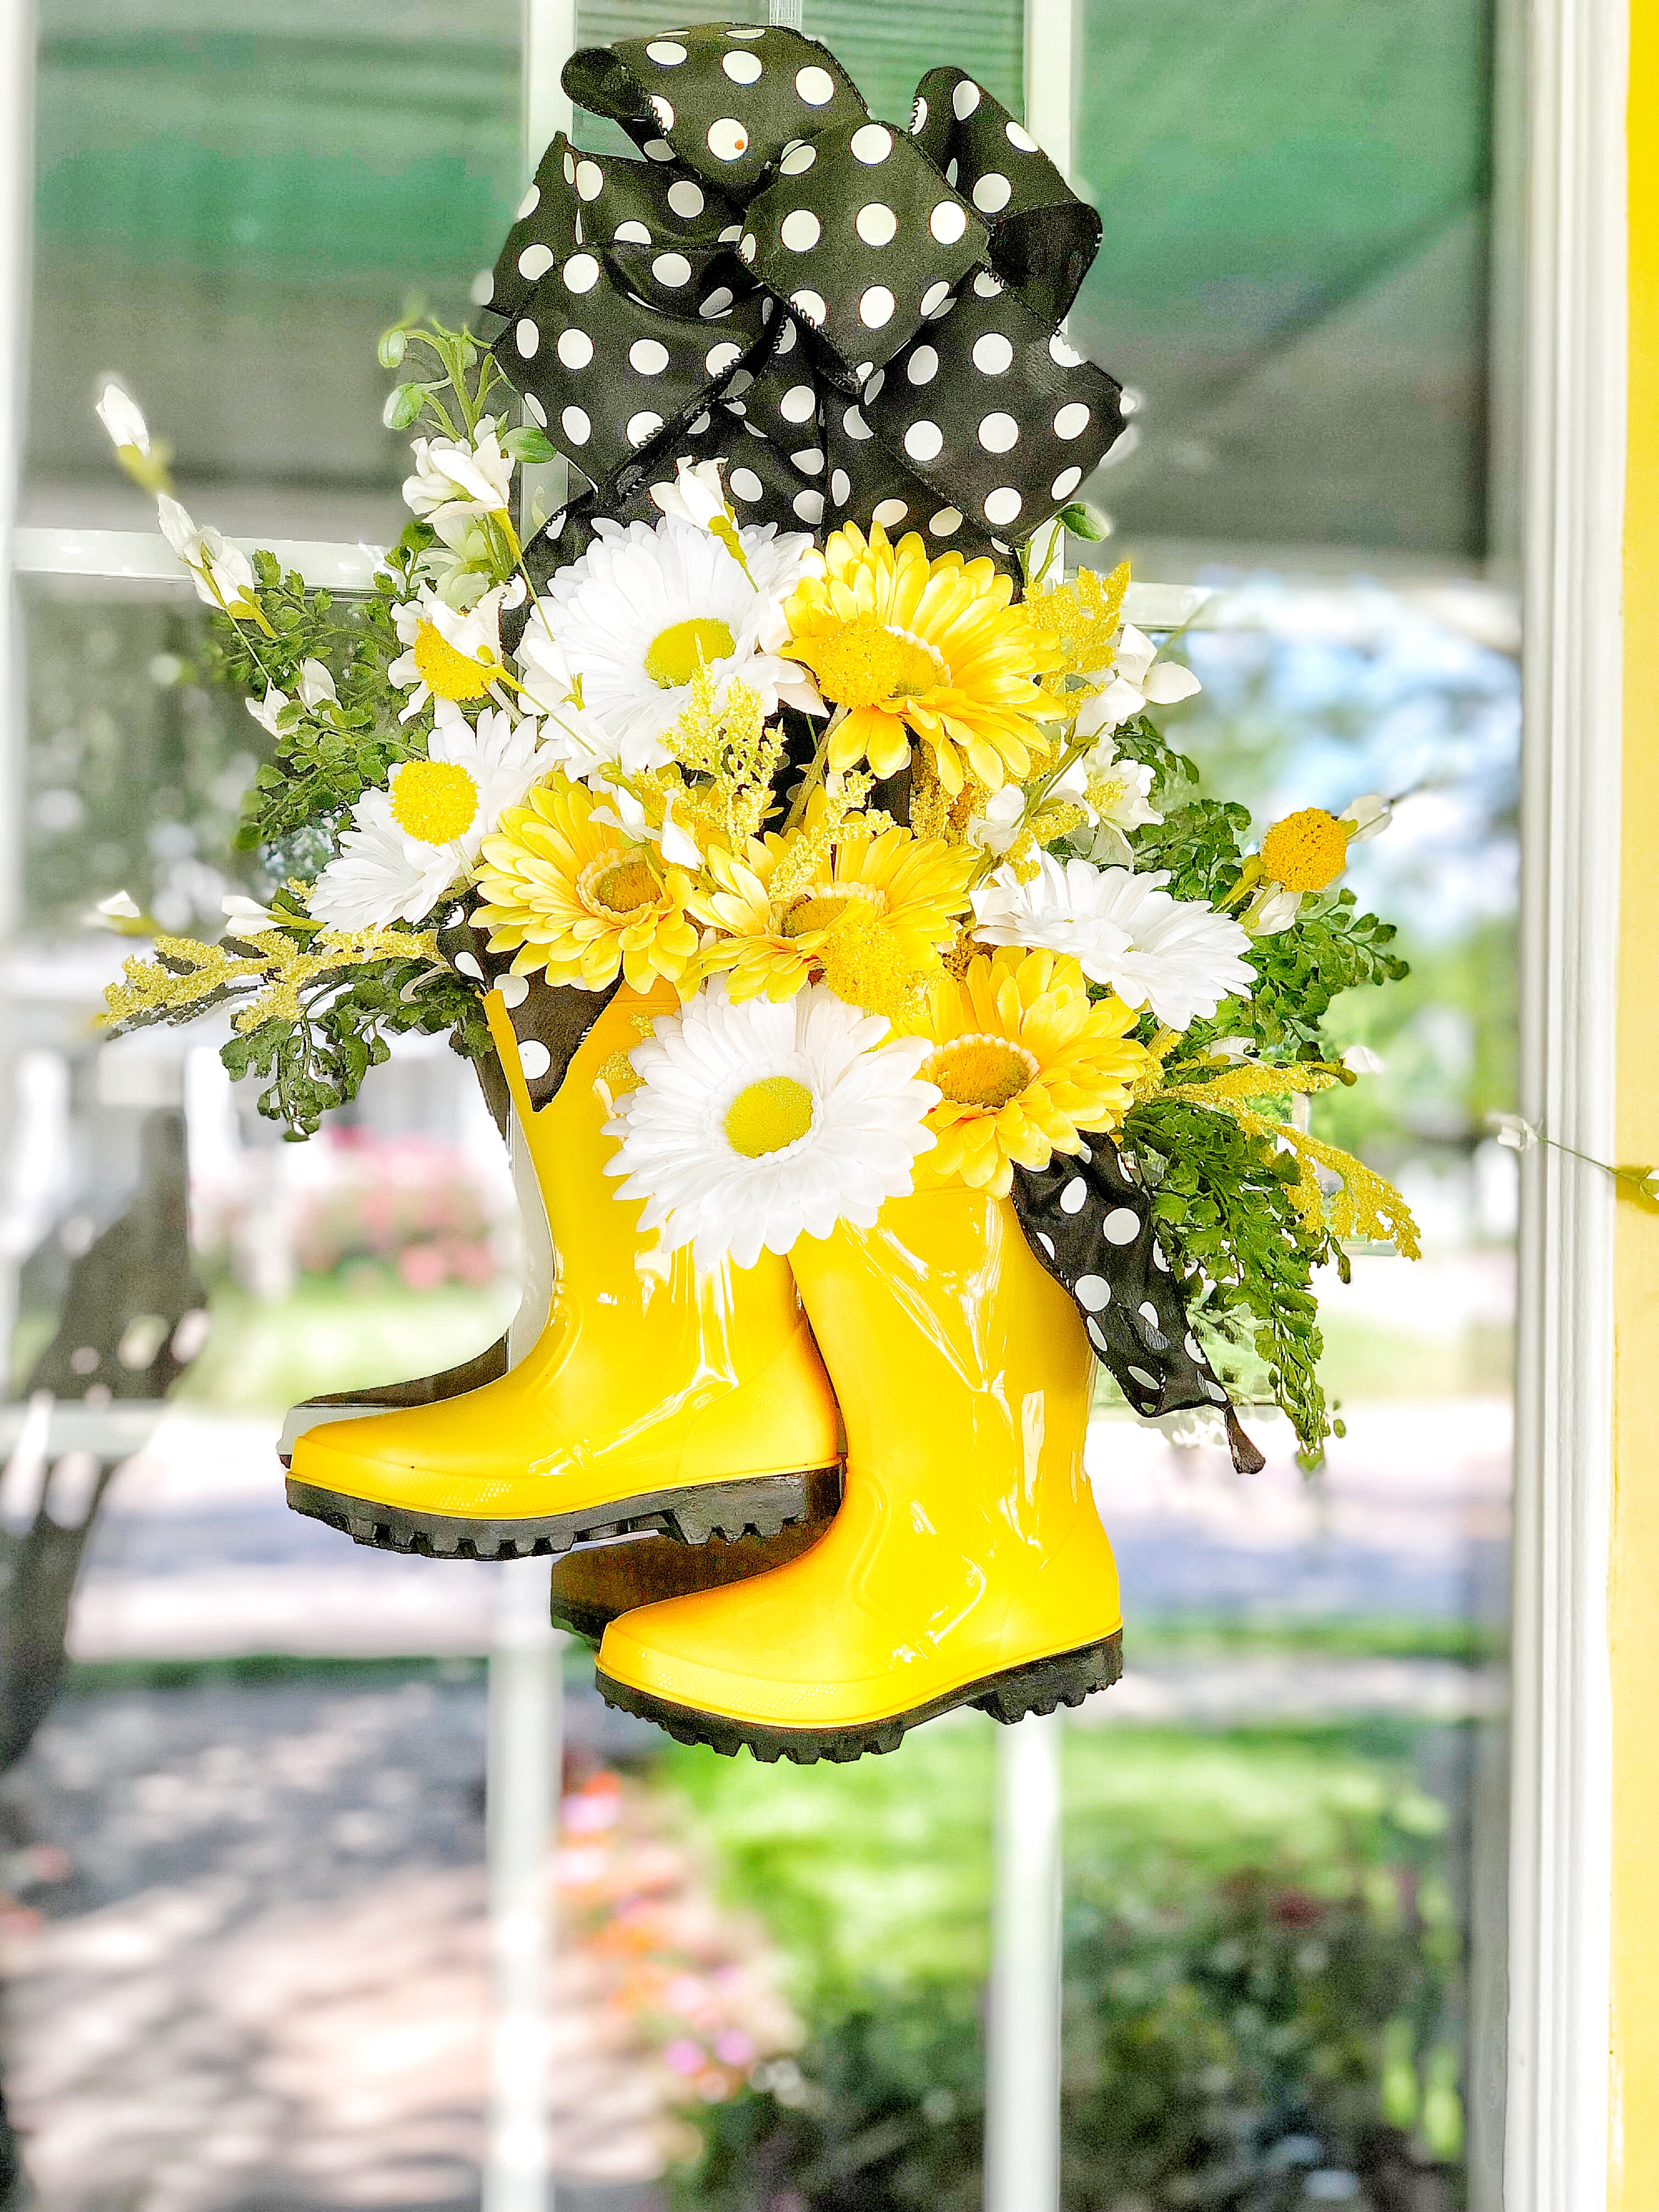 Yellow rain boots with flowers in it hanging in front of a window.